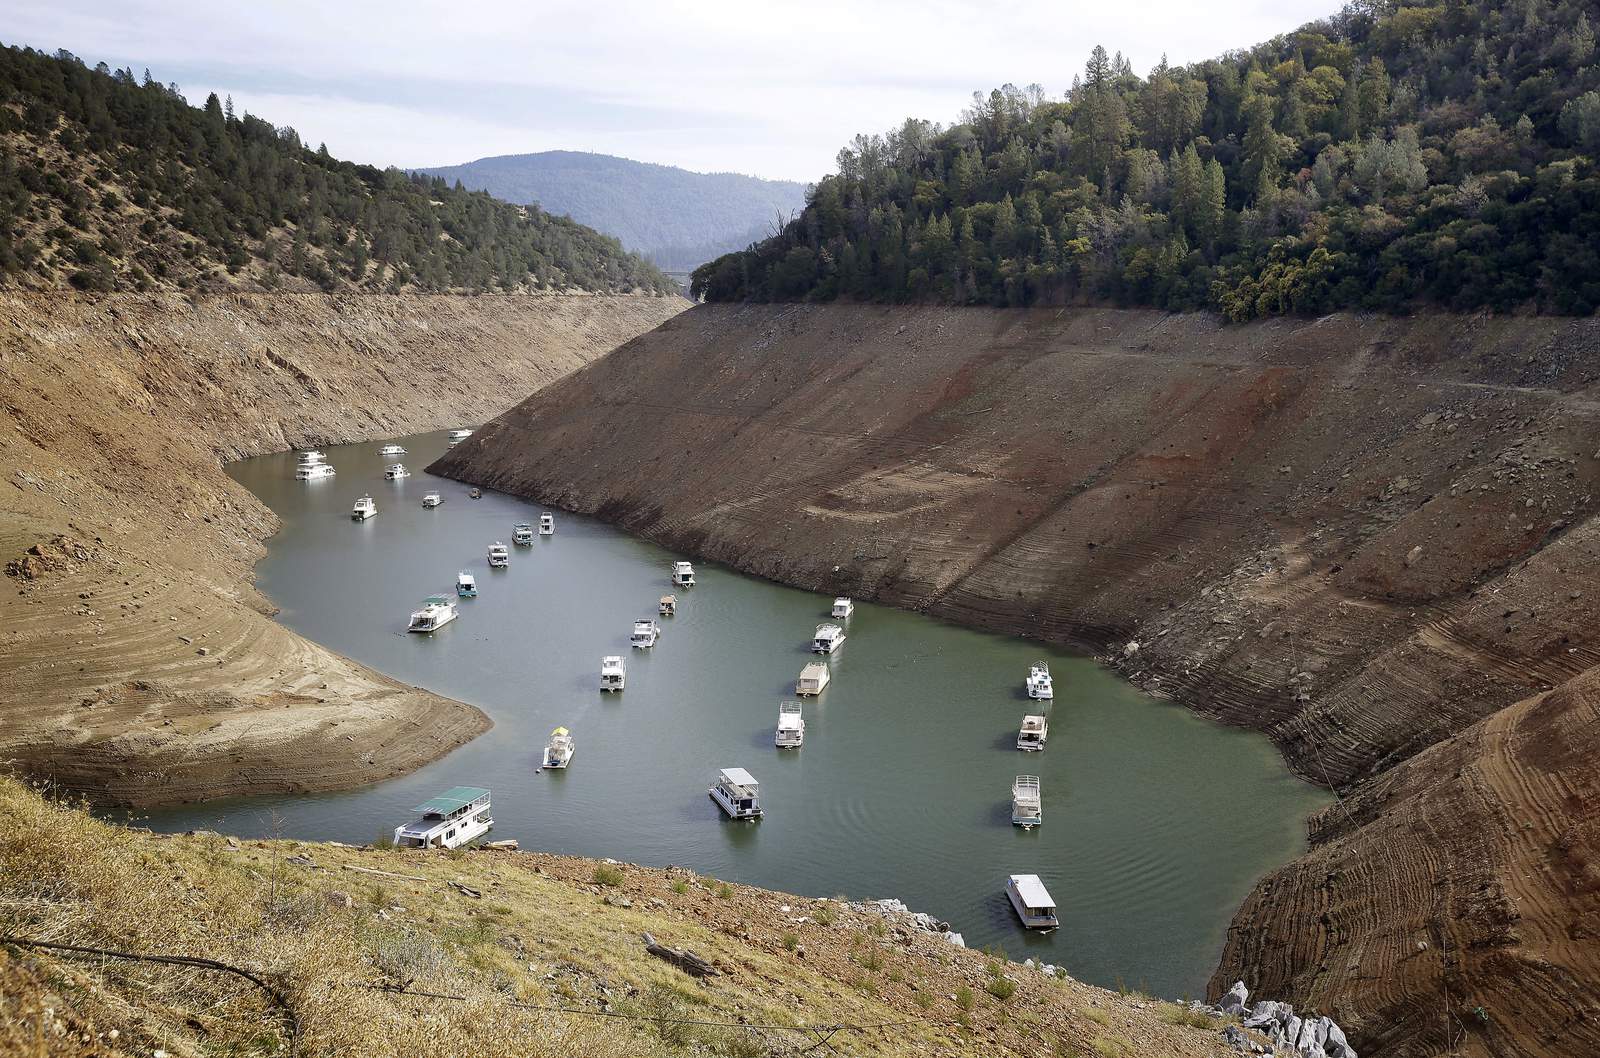 On tap in California: Another drought four years after last